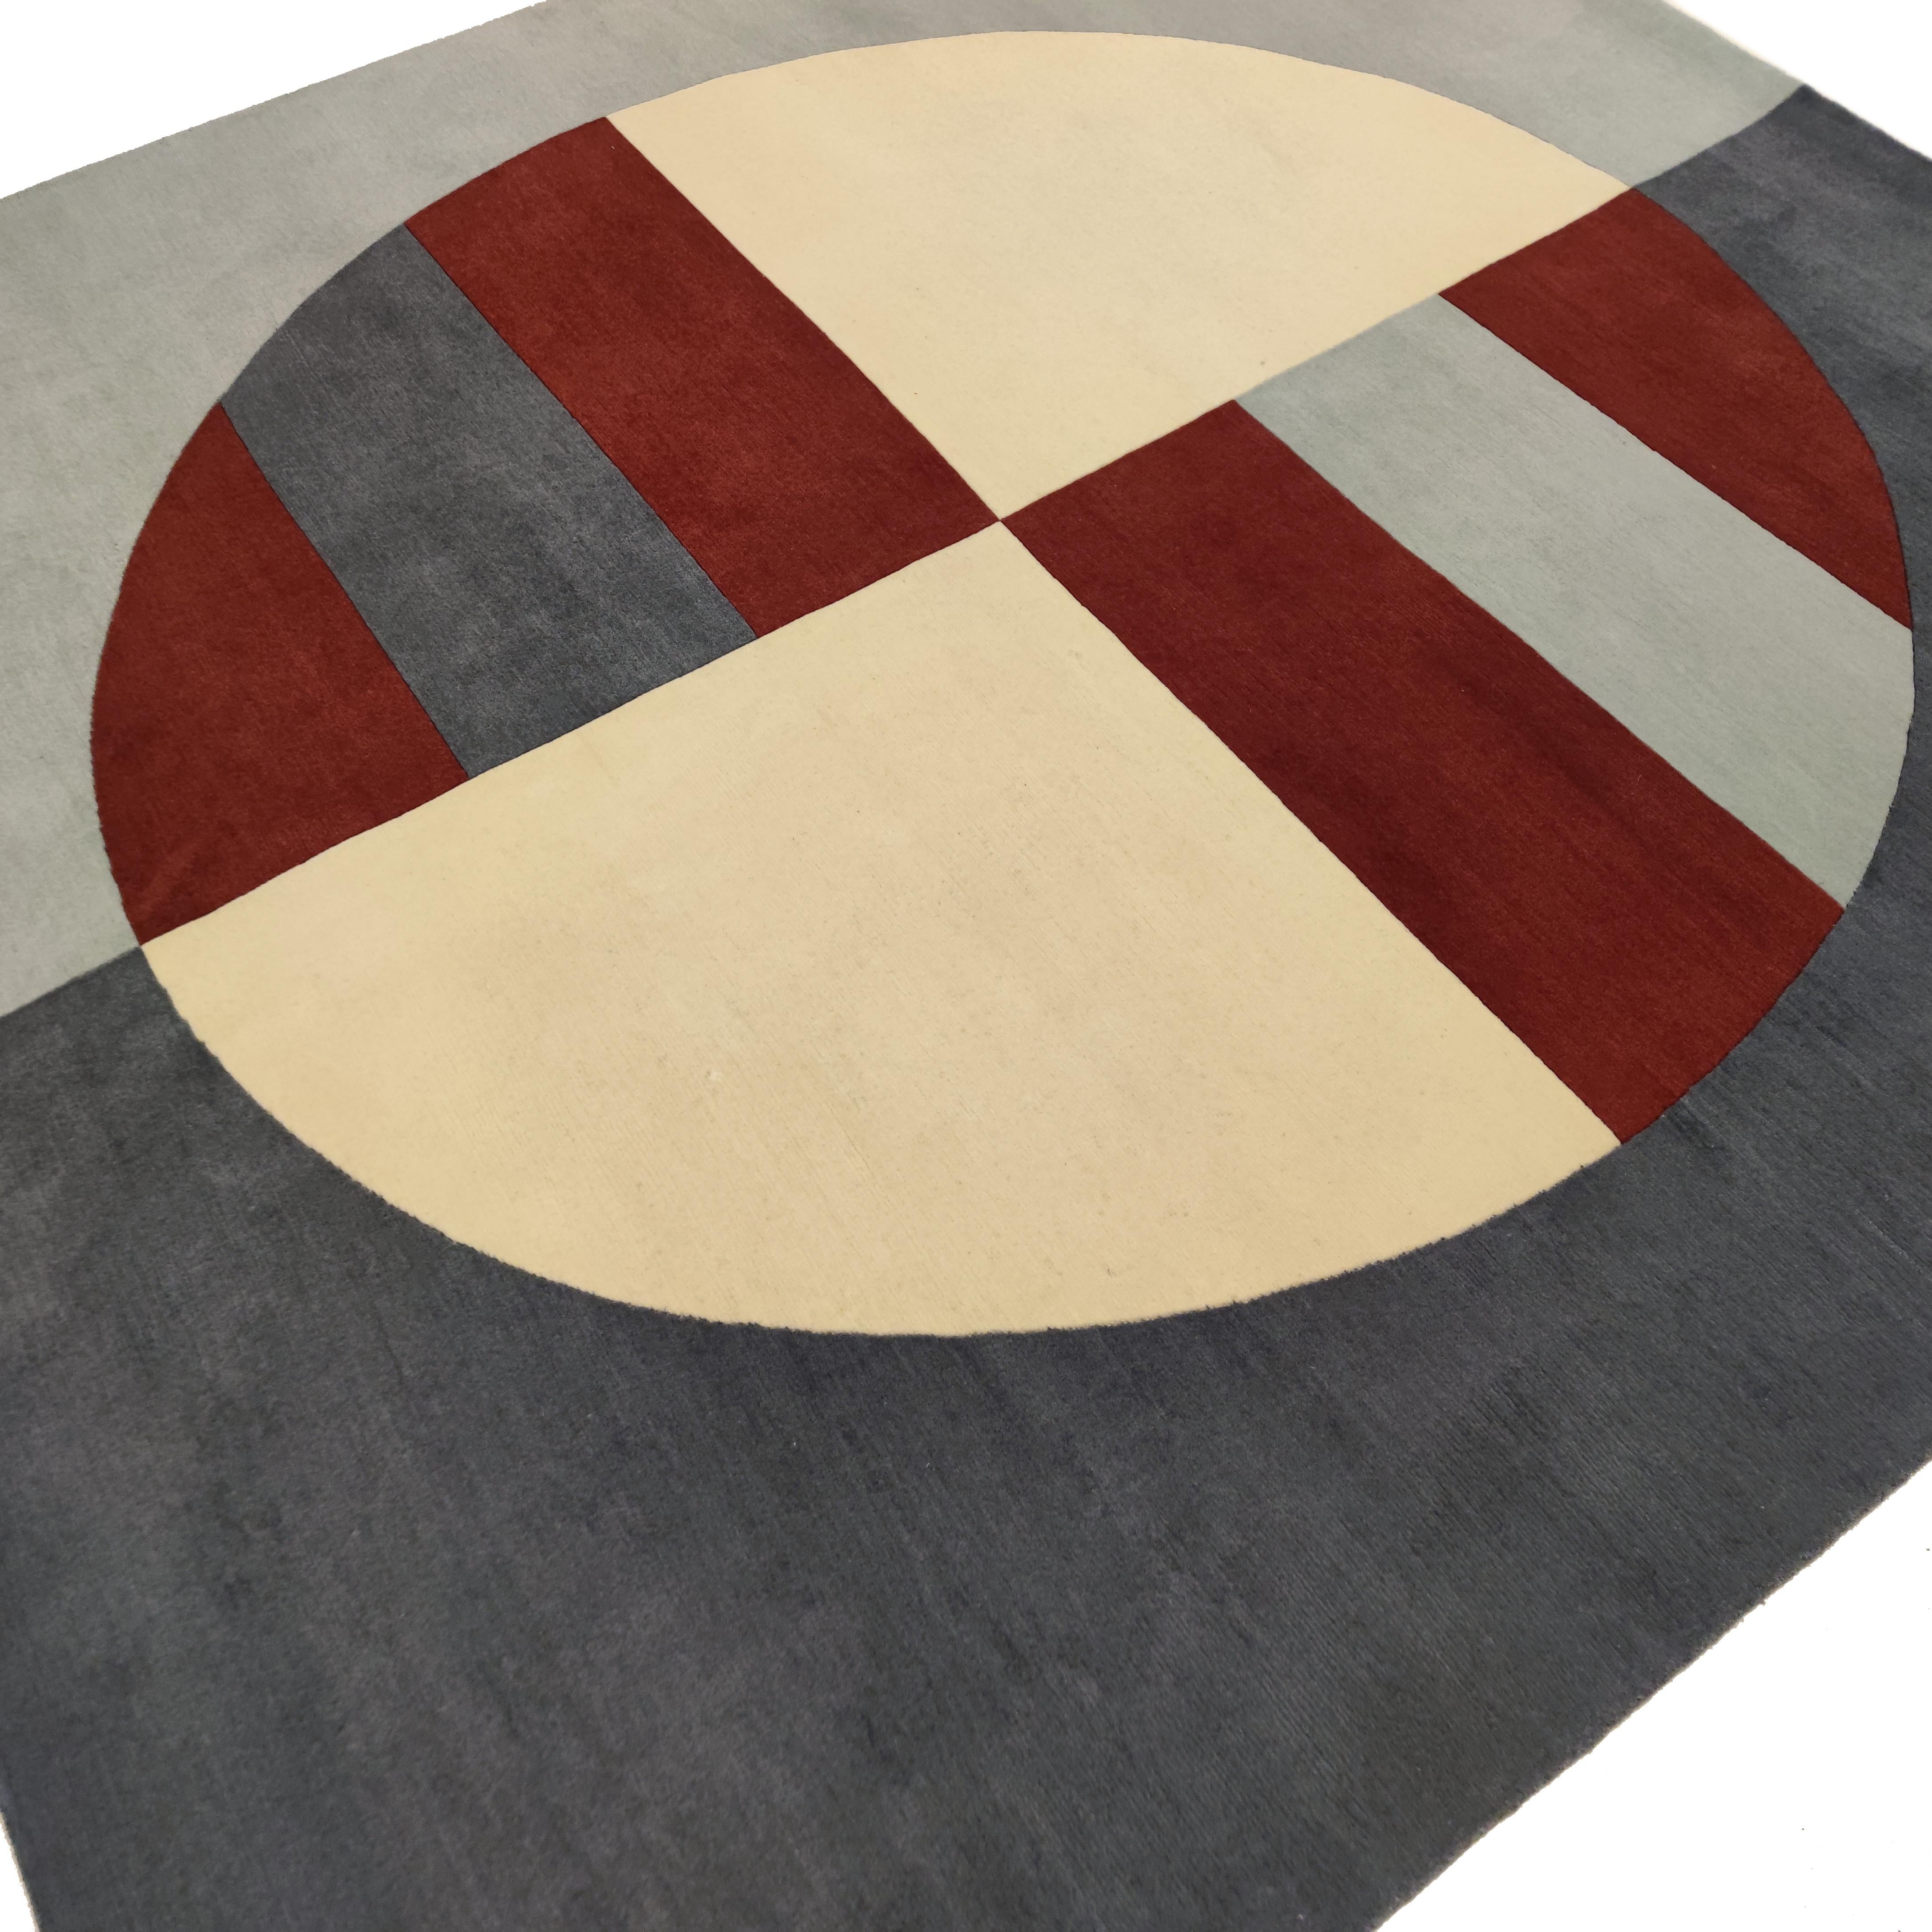 ‘Equilibrio’ is a prime example of Clara Bona’s first rug collection ‘Relazioni’. In her first venture into rug design, renowned Milanese architect Clara Bona employs geometric shapes combined with a rich palette, matched to create harmonious yet